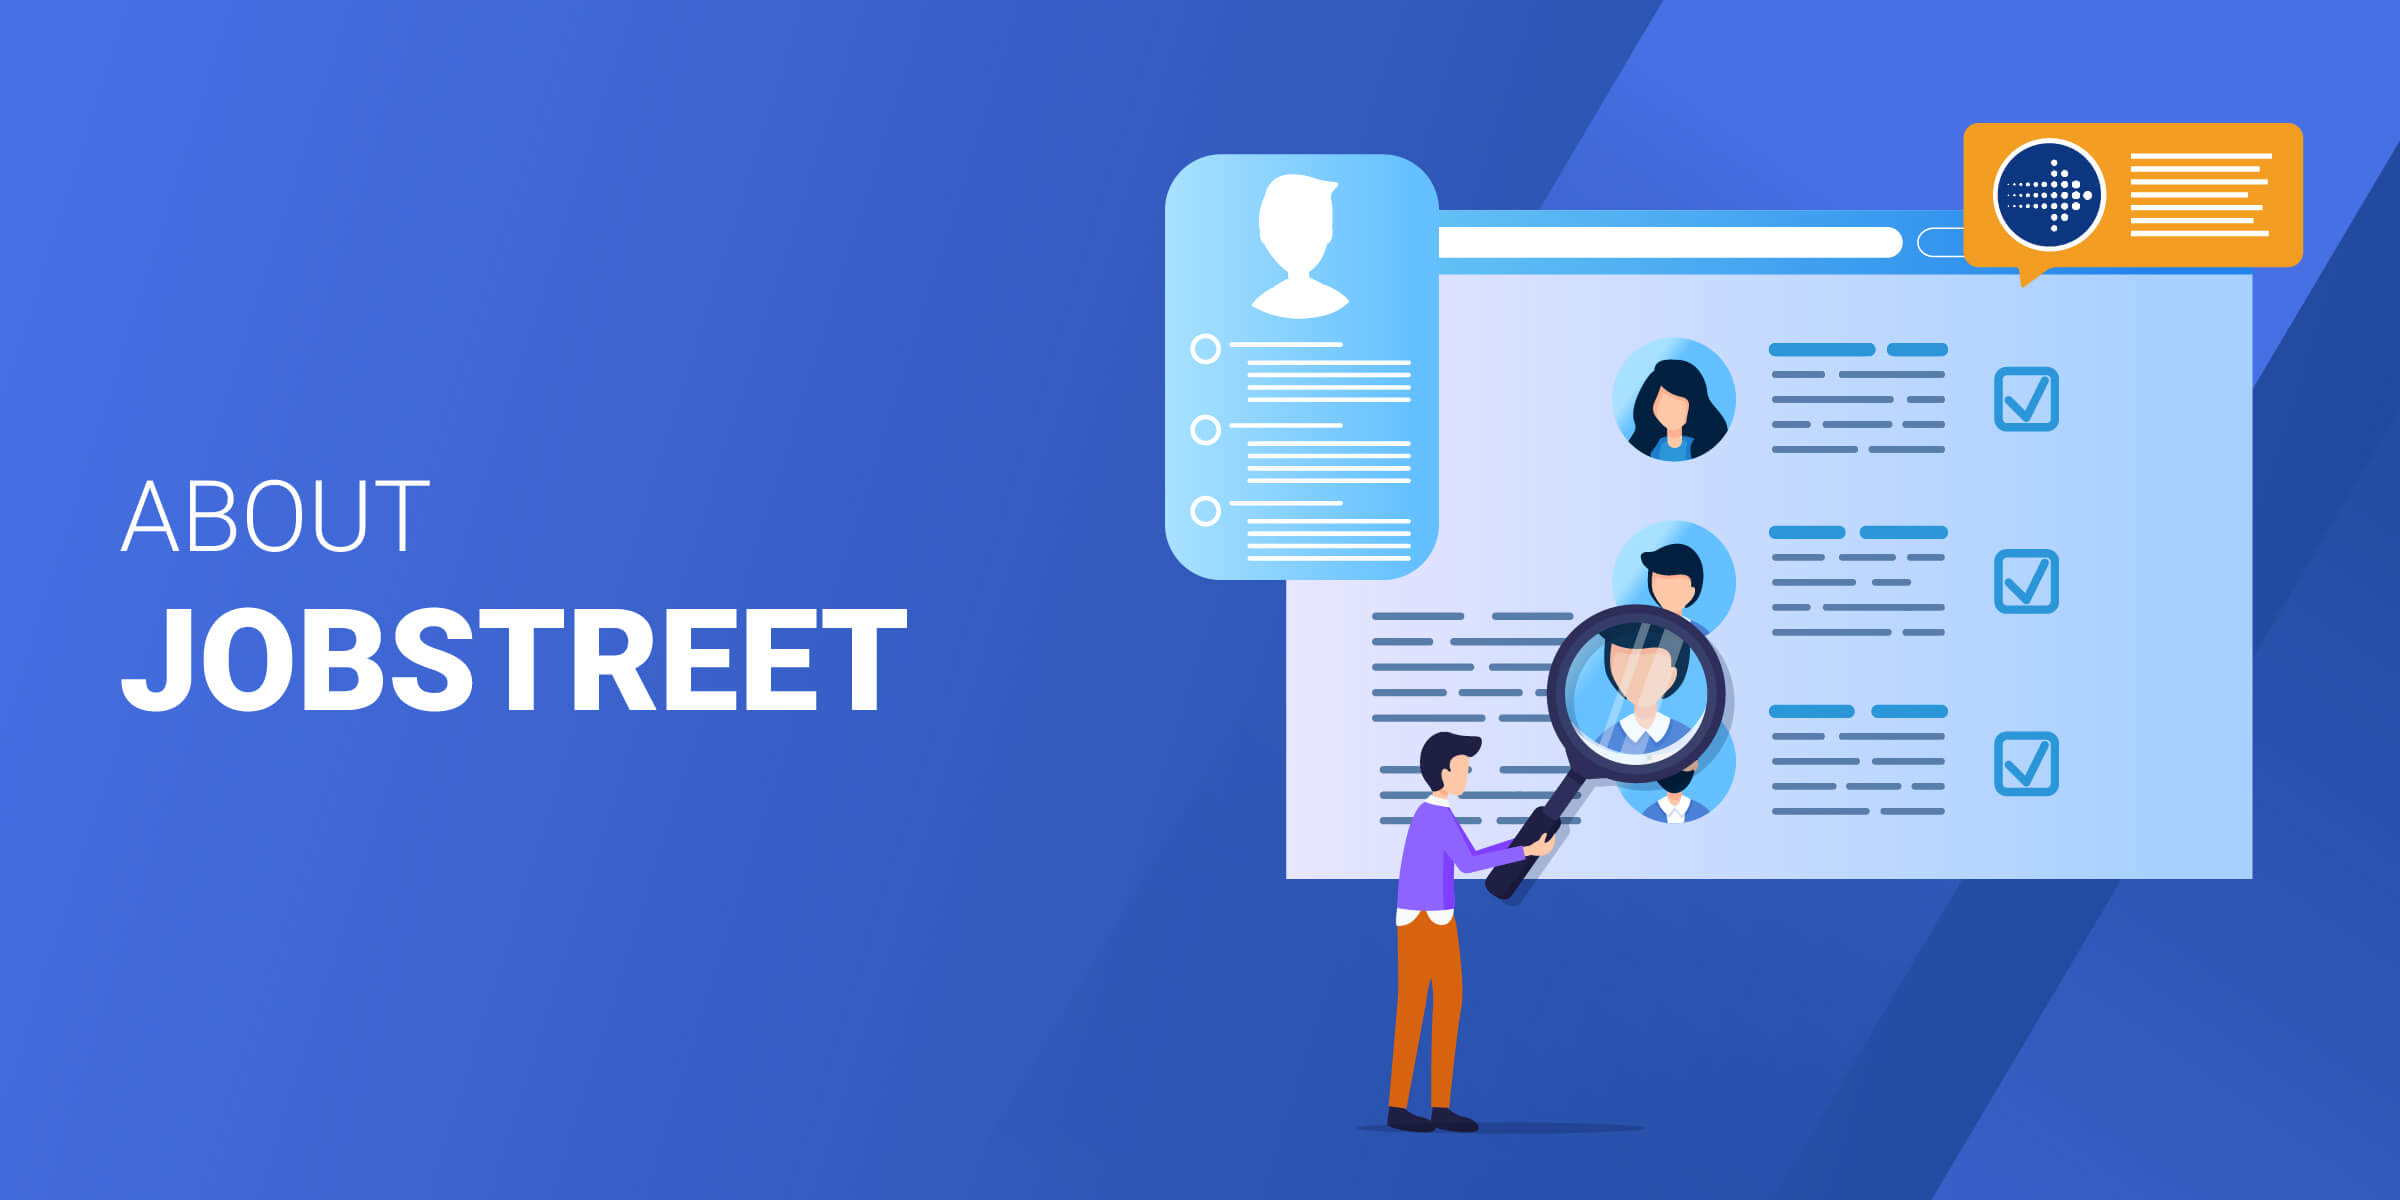 About JobStreet